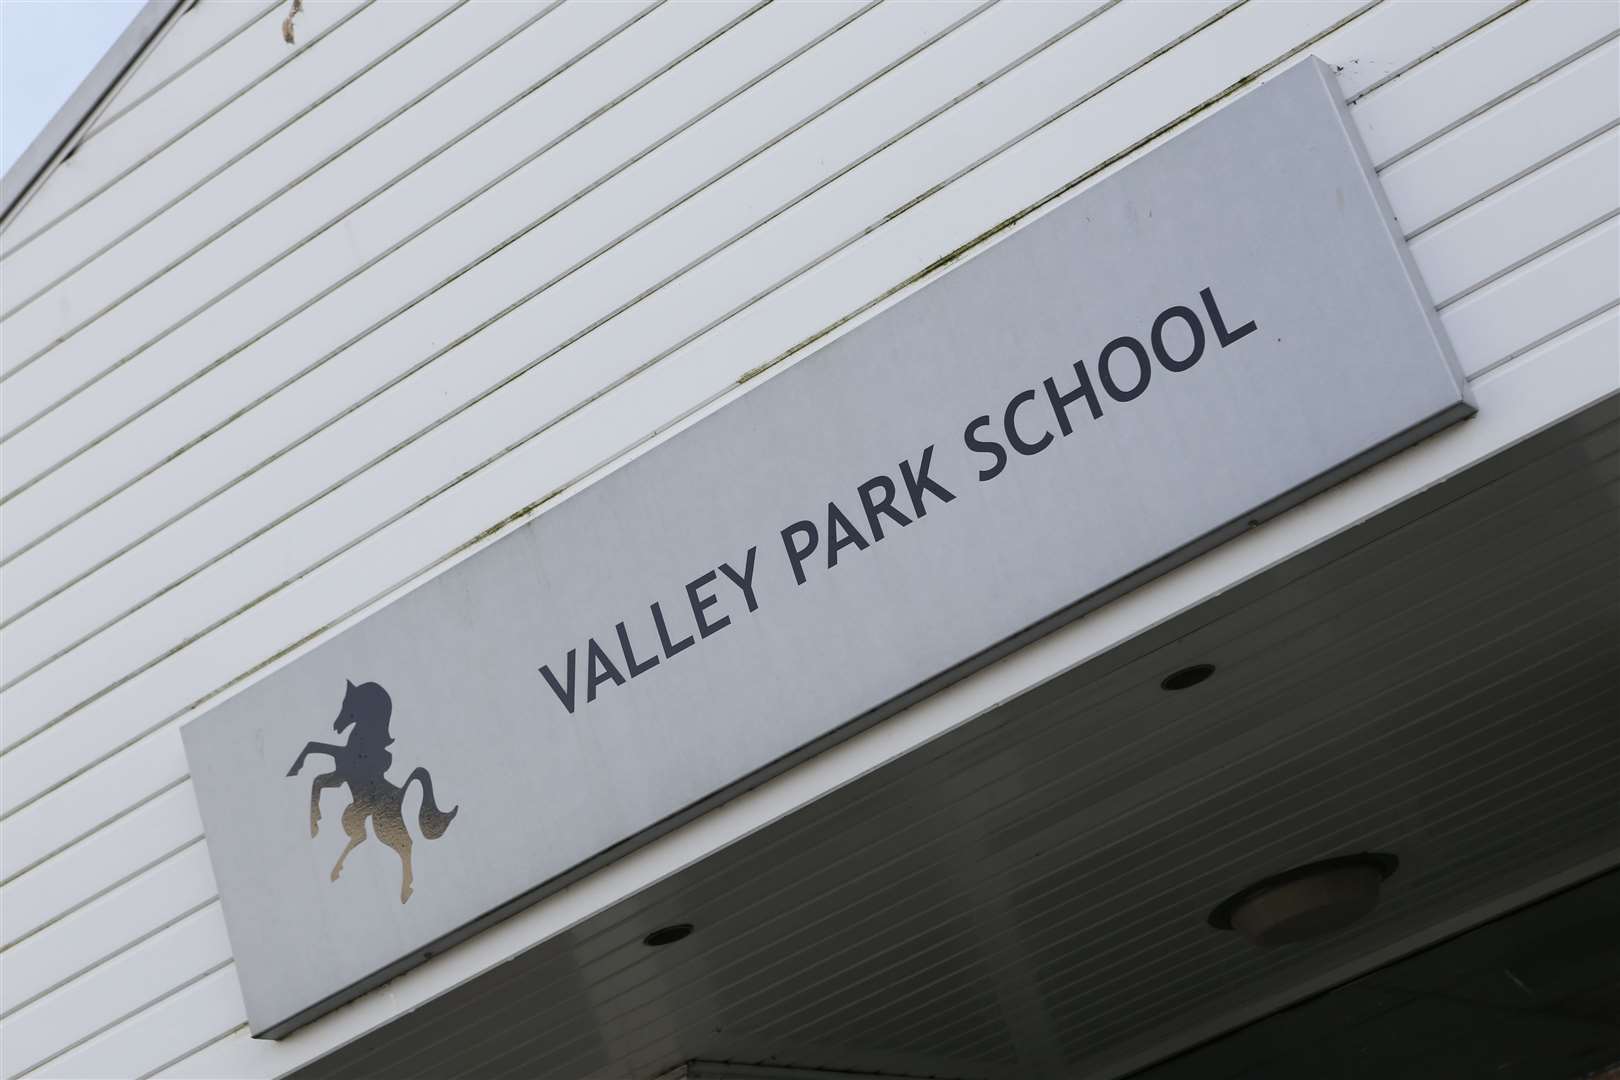 Valley Park School has been rated Good by Ofsted